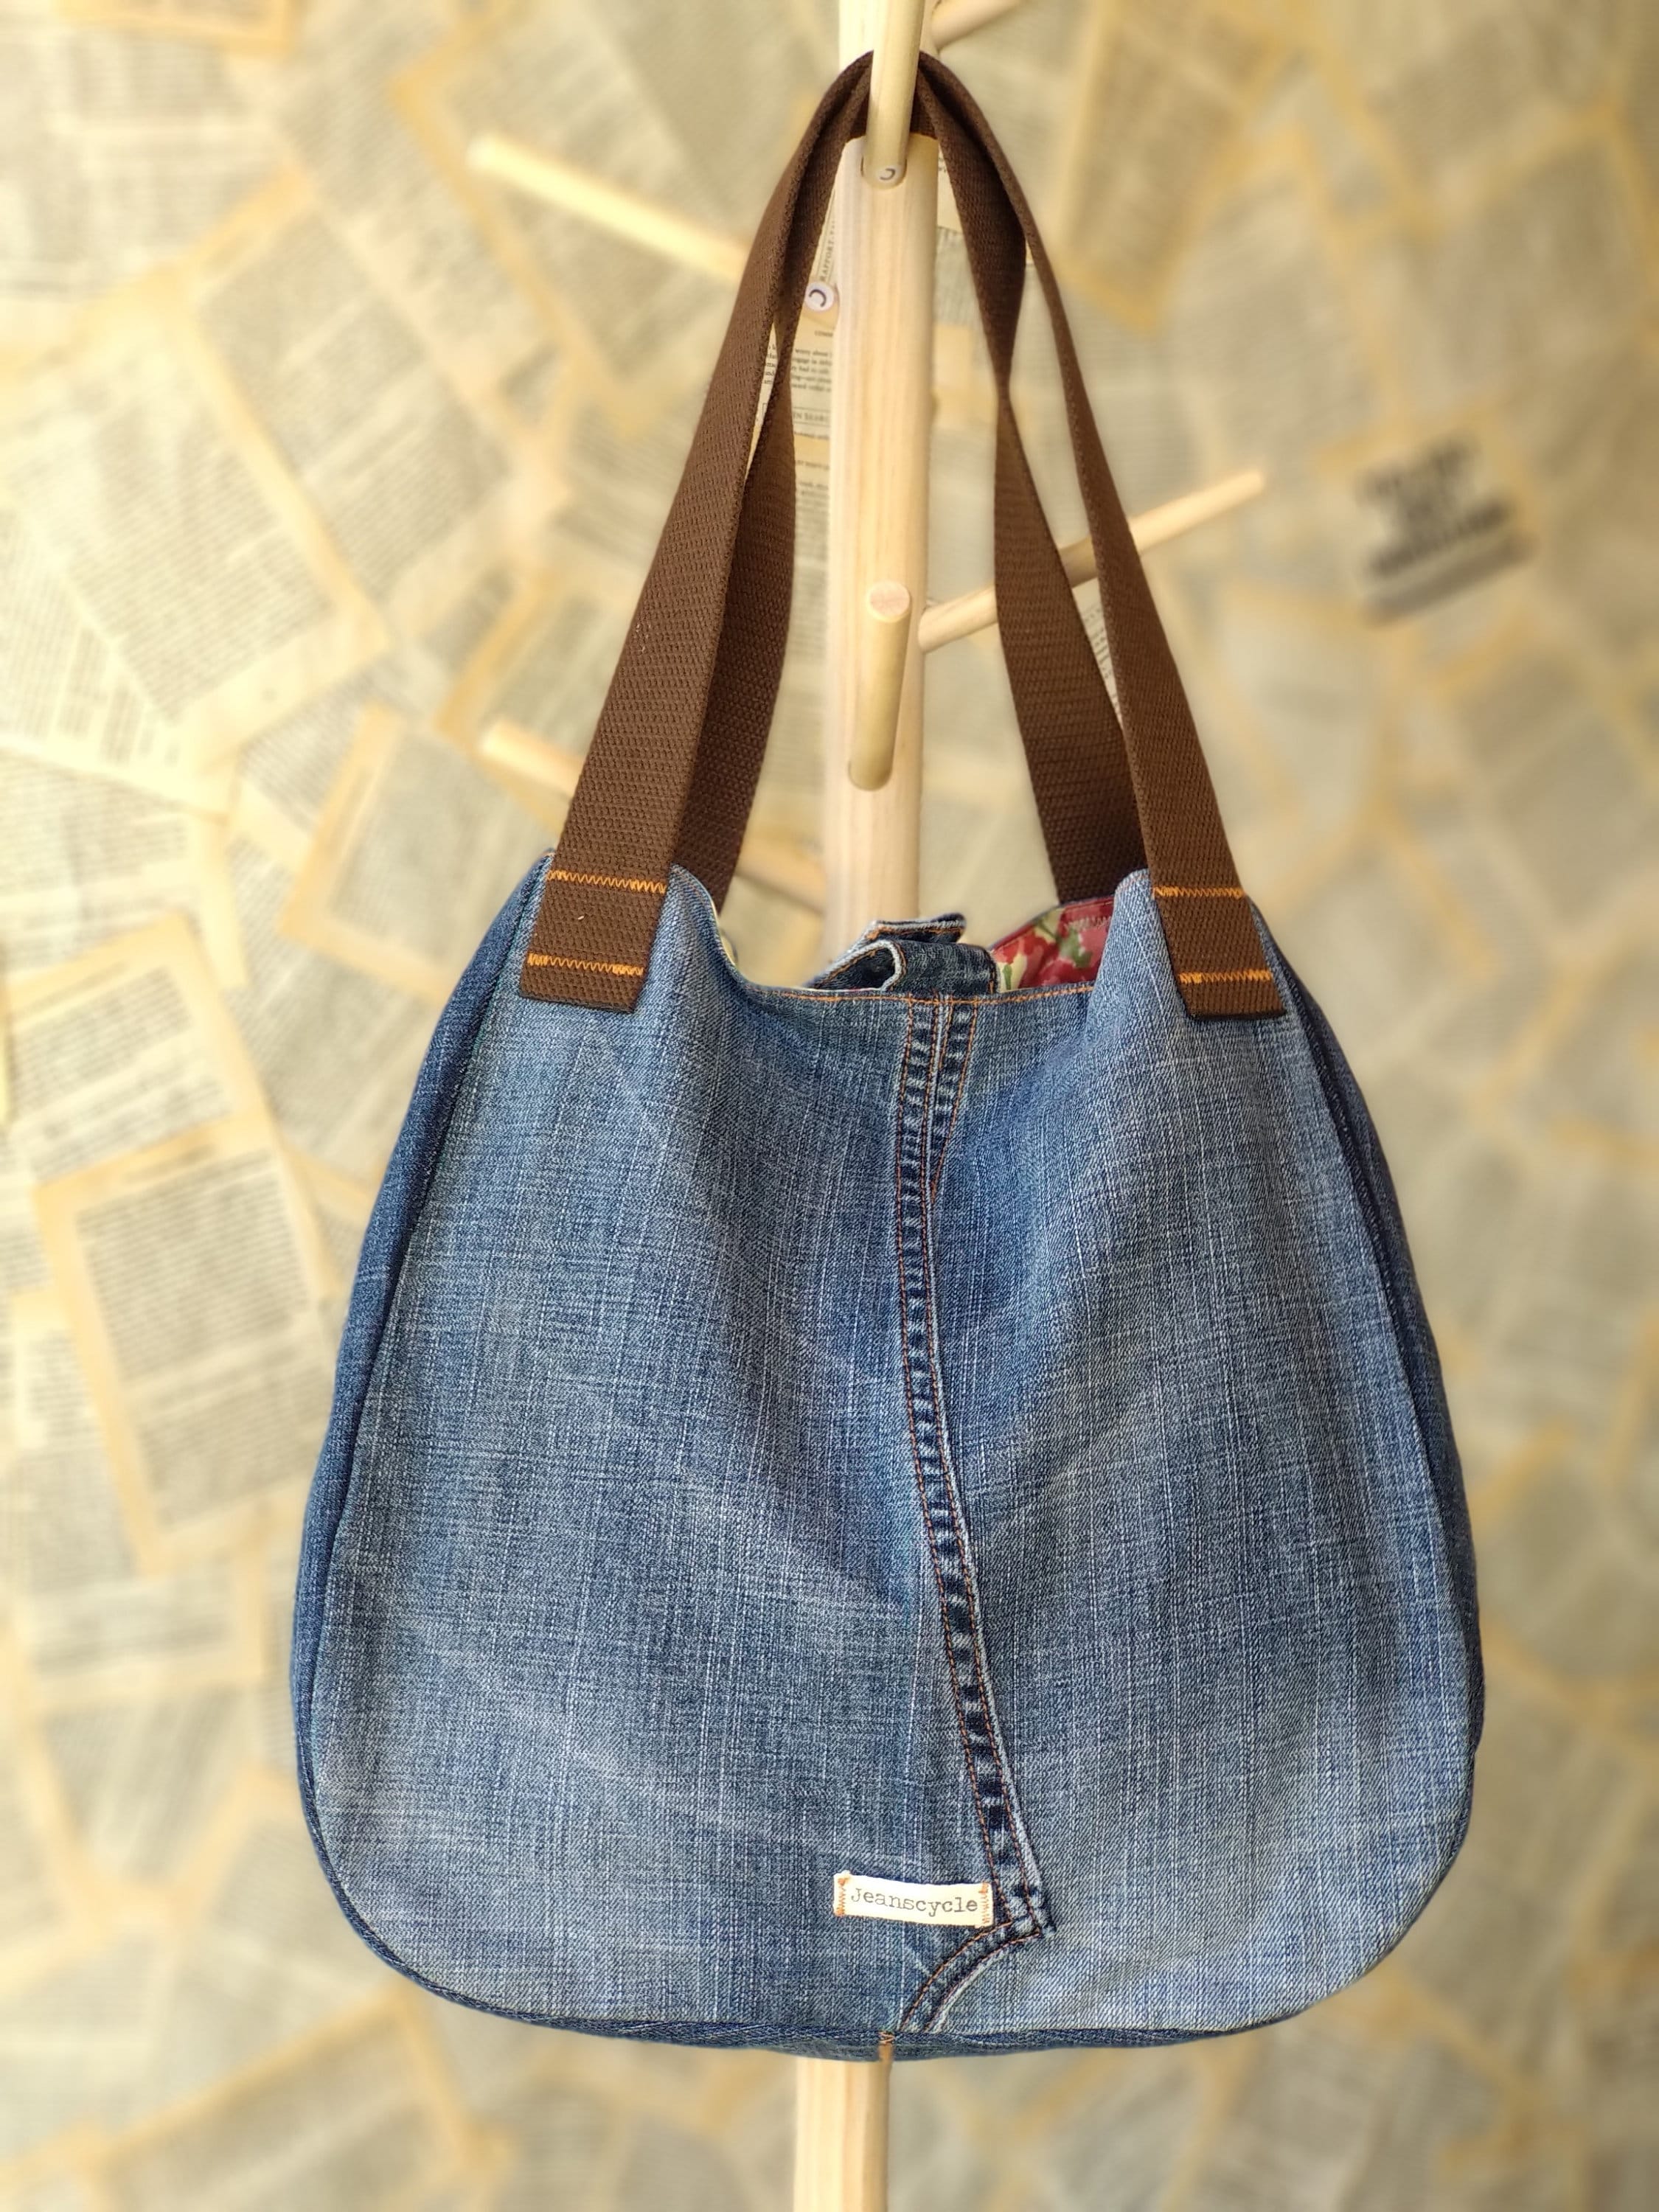 Large Recycled Upcycled Jeans Denim Tote Bag Gym Bag Diaper | Etsy